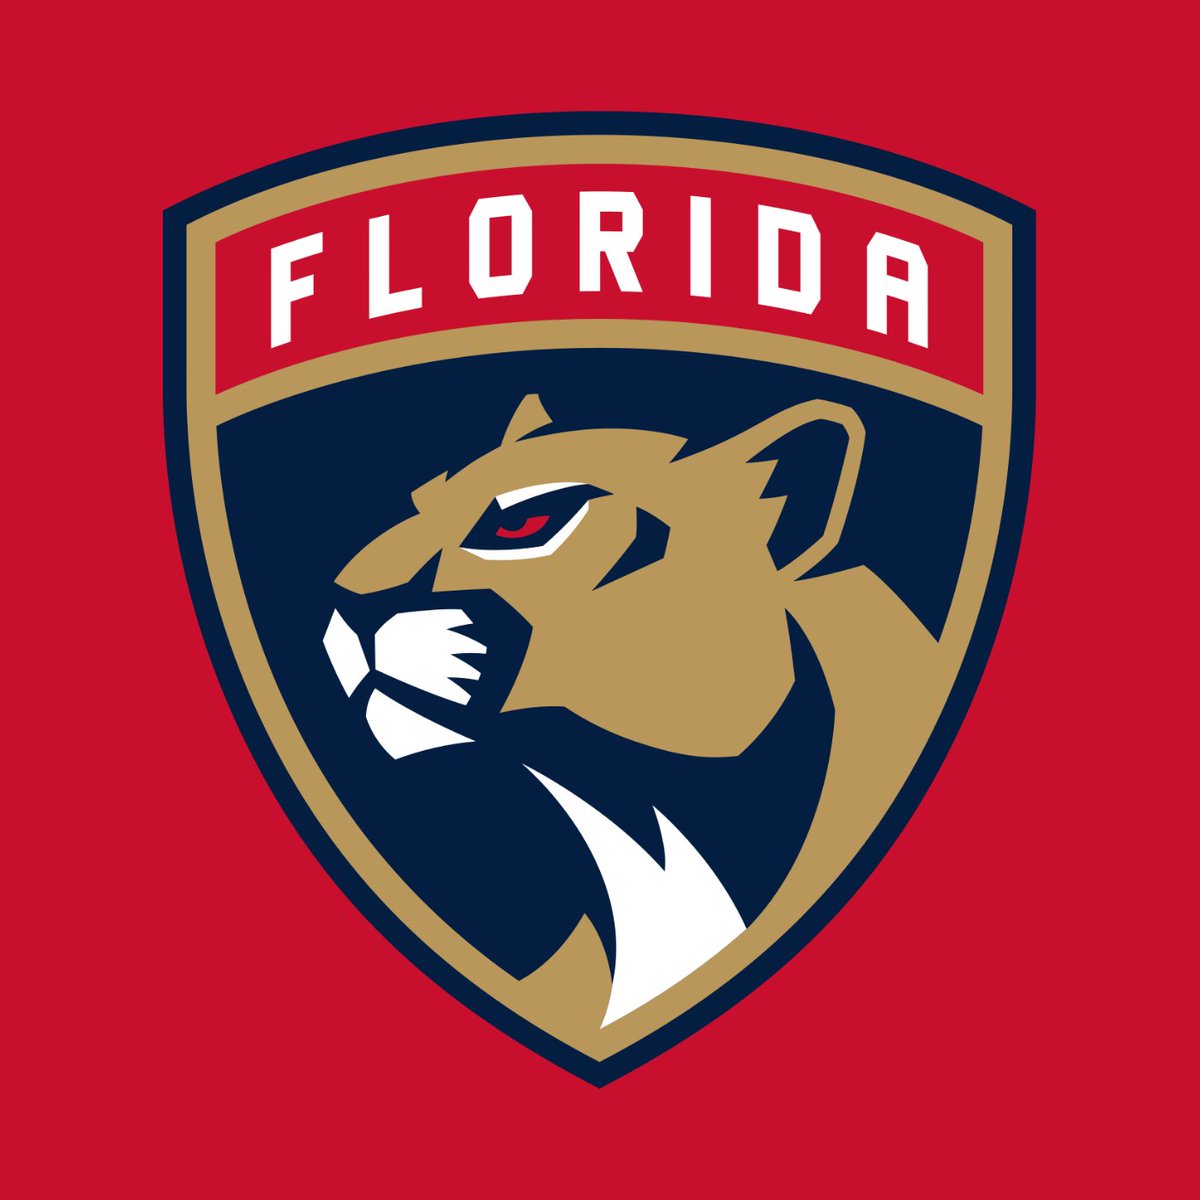 With the 189th overall selection in the NHL Draft, the Florida Panthers are proud to select: Honky. https://t.co/EzDd8jbrq1